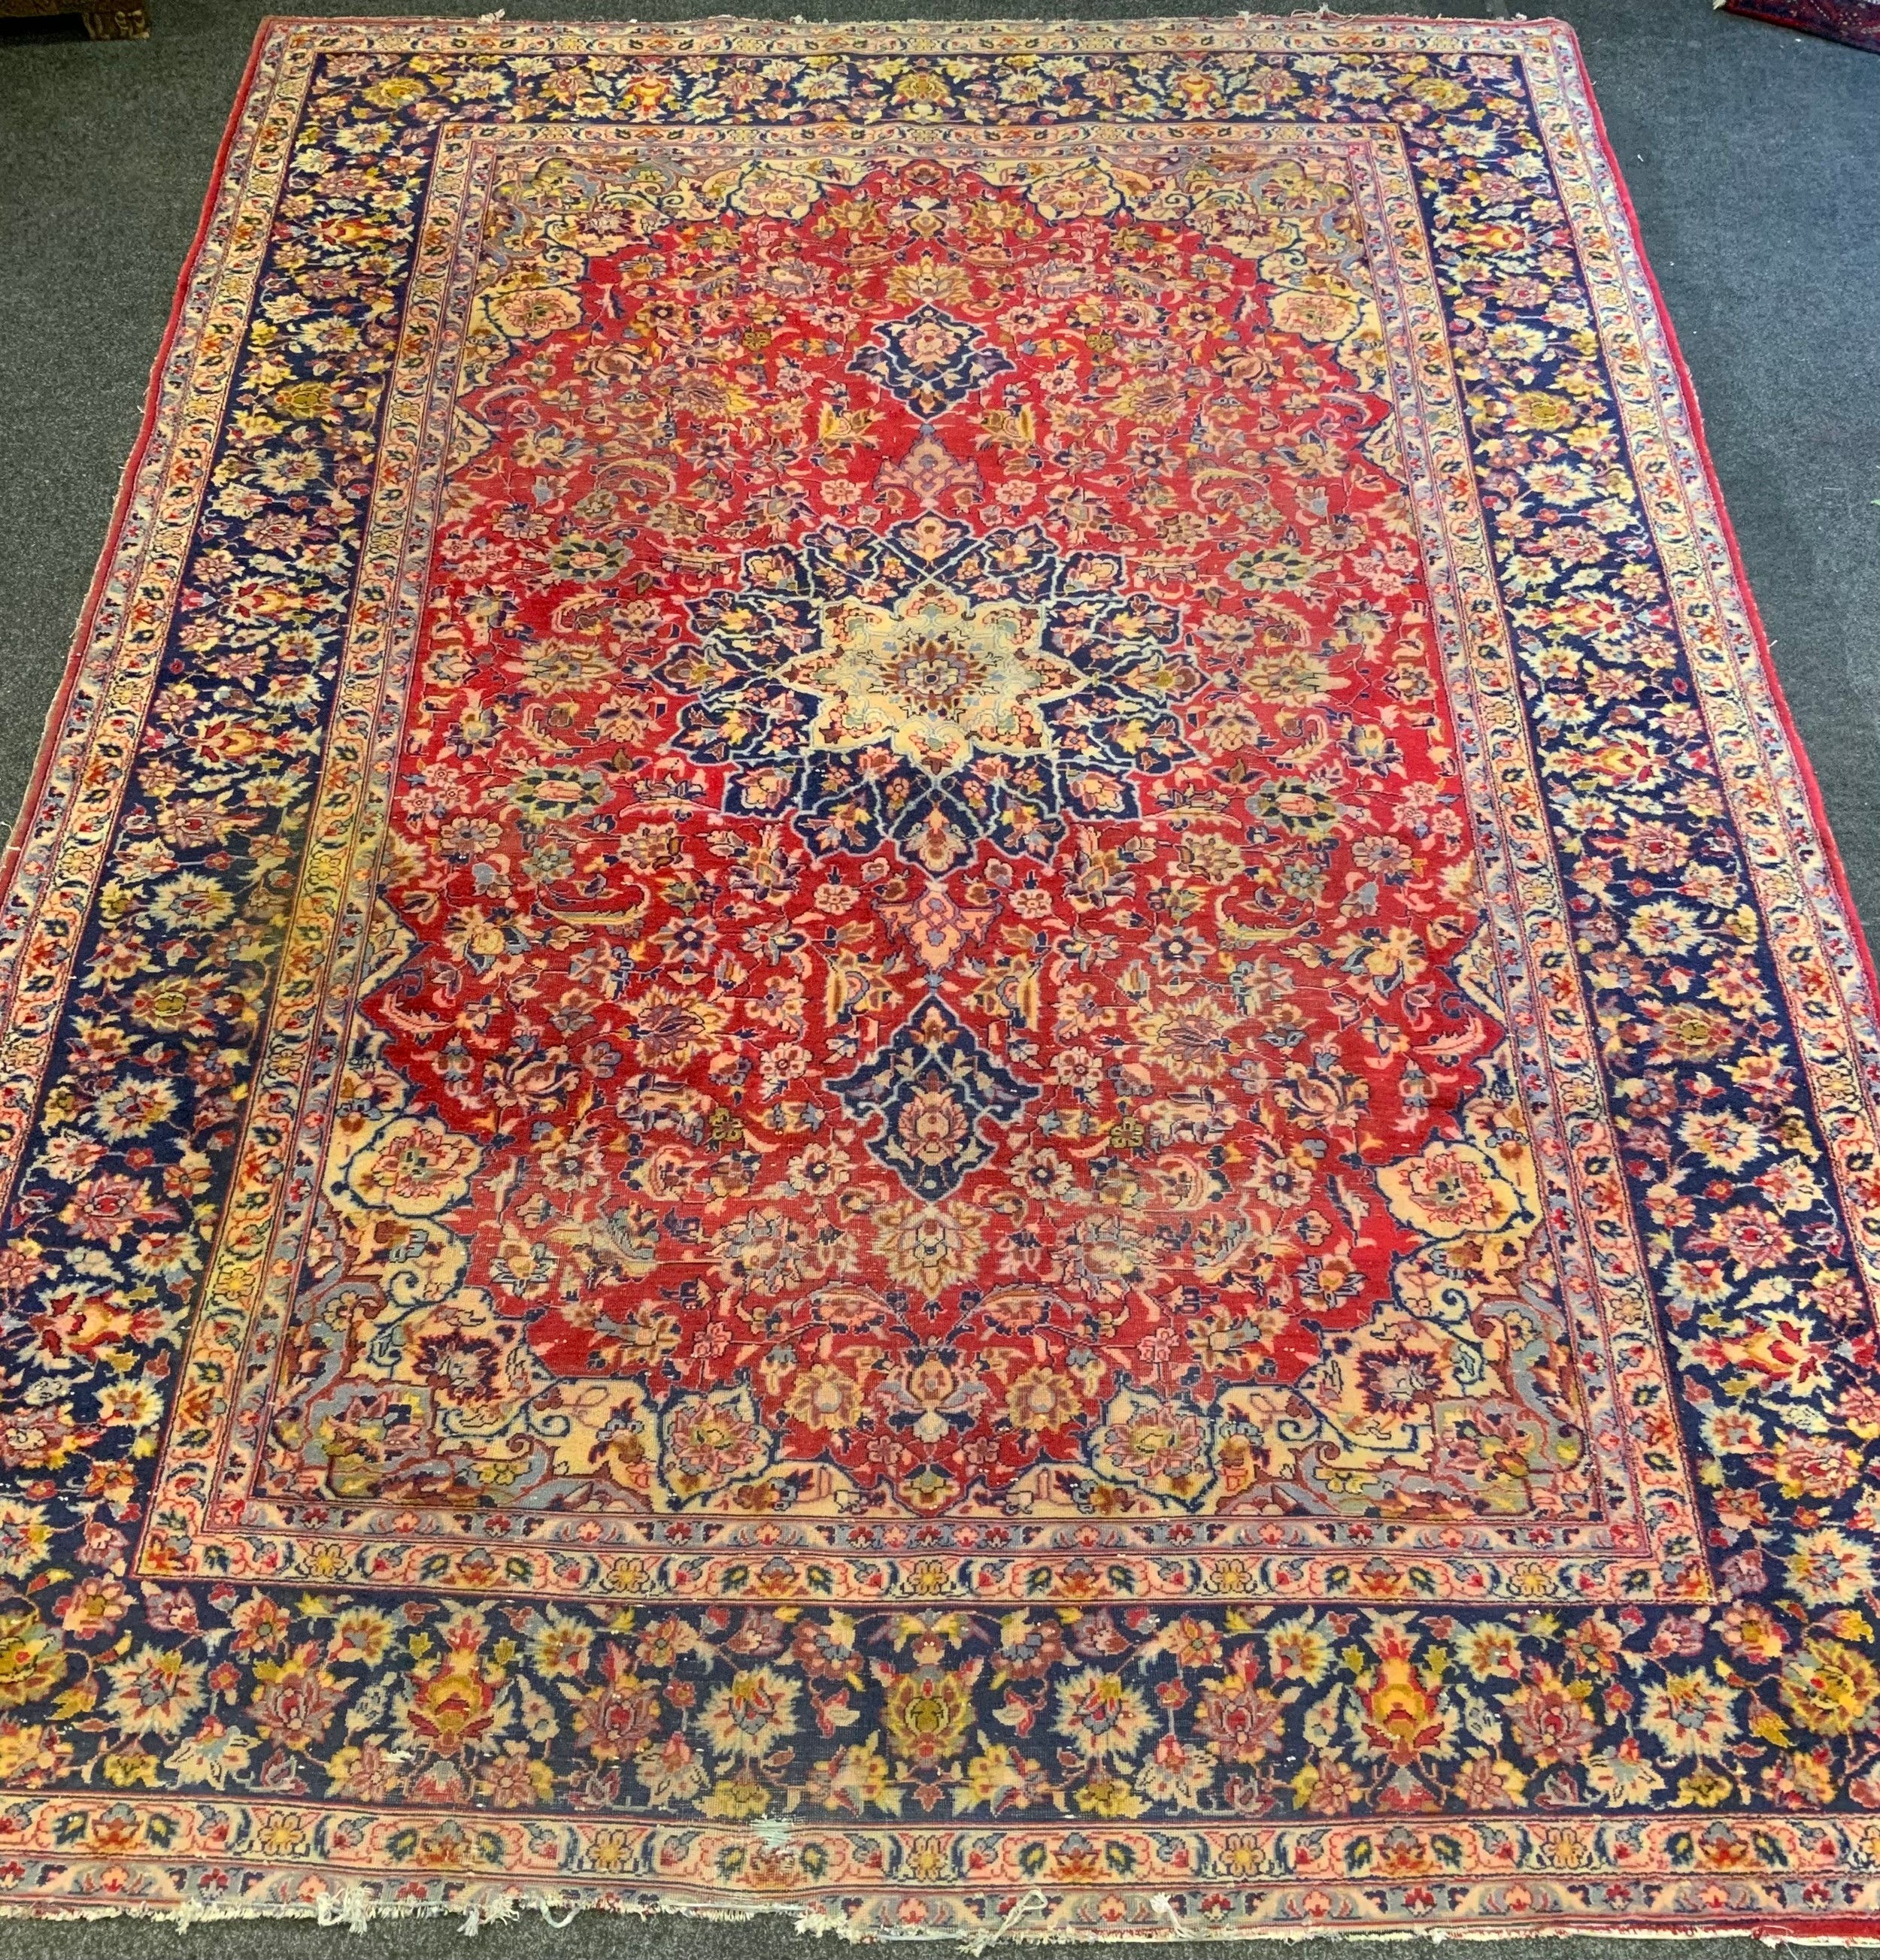 A large Isfaharn rug, approximately 296cm x 385cm